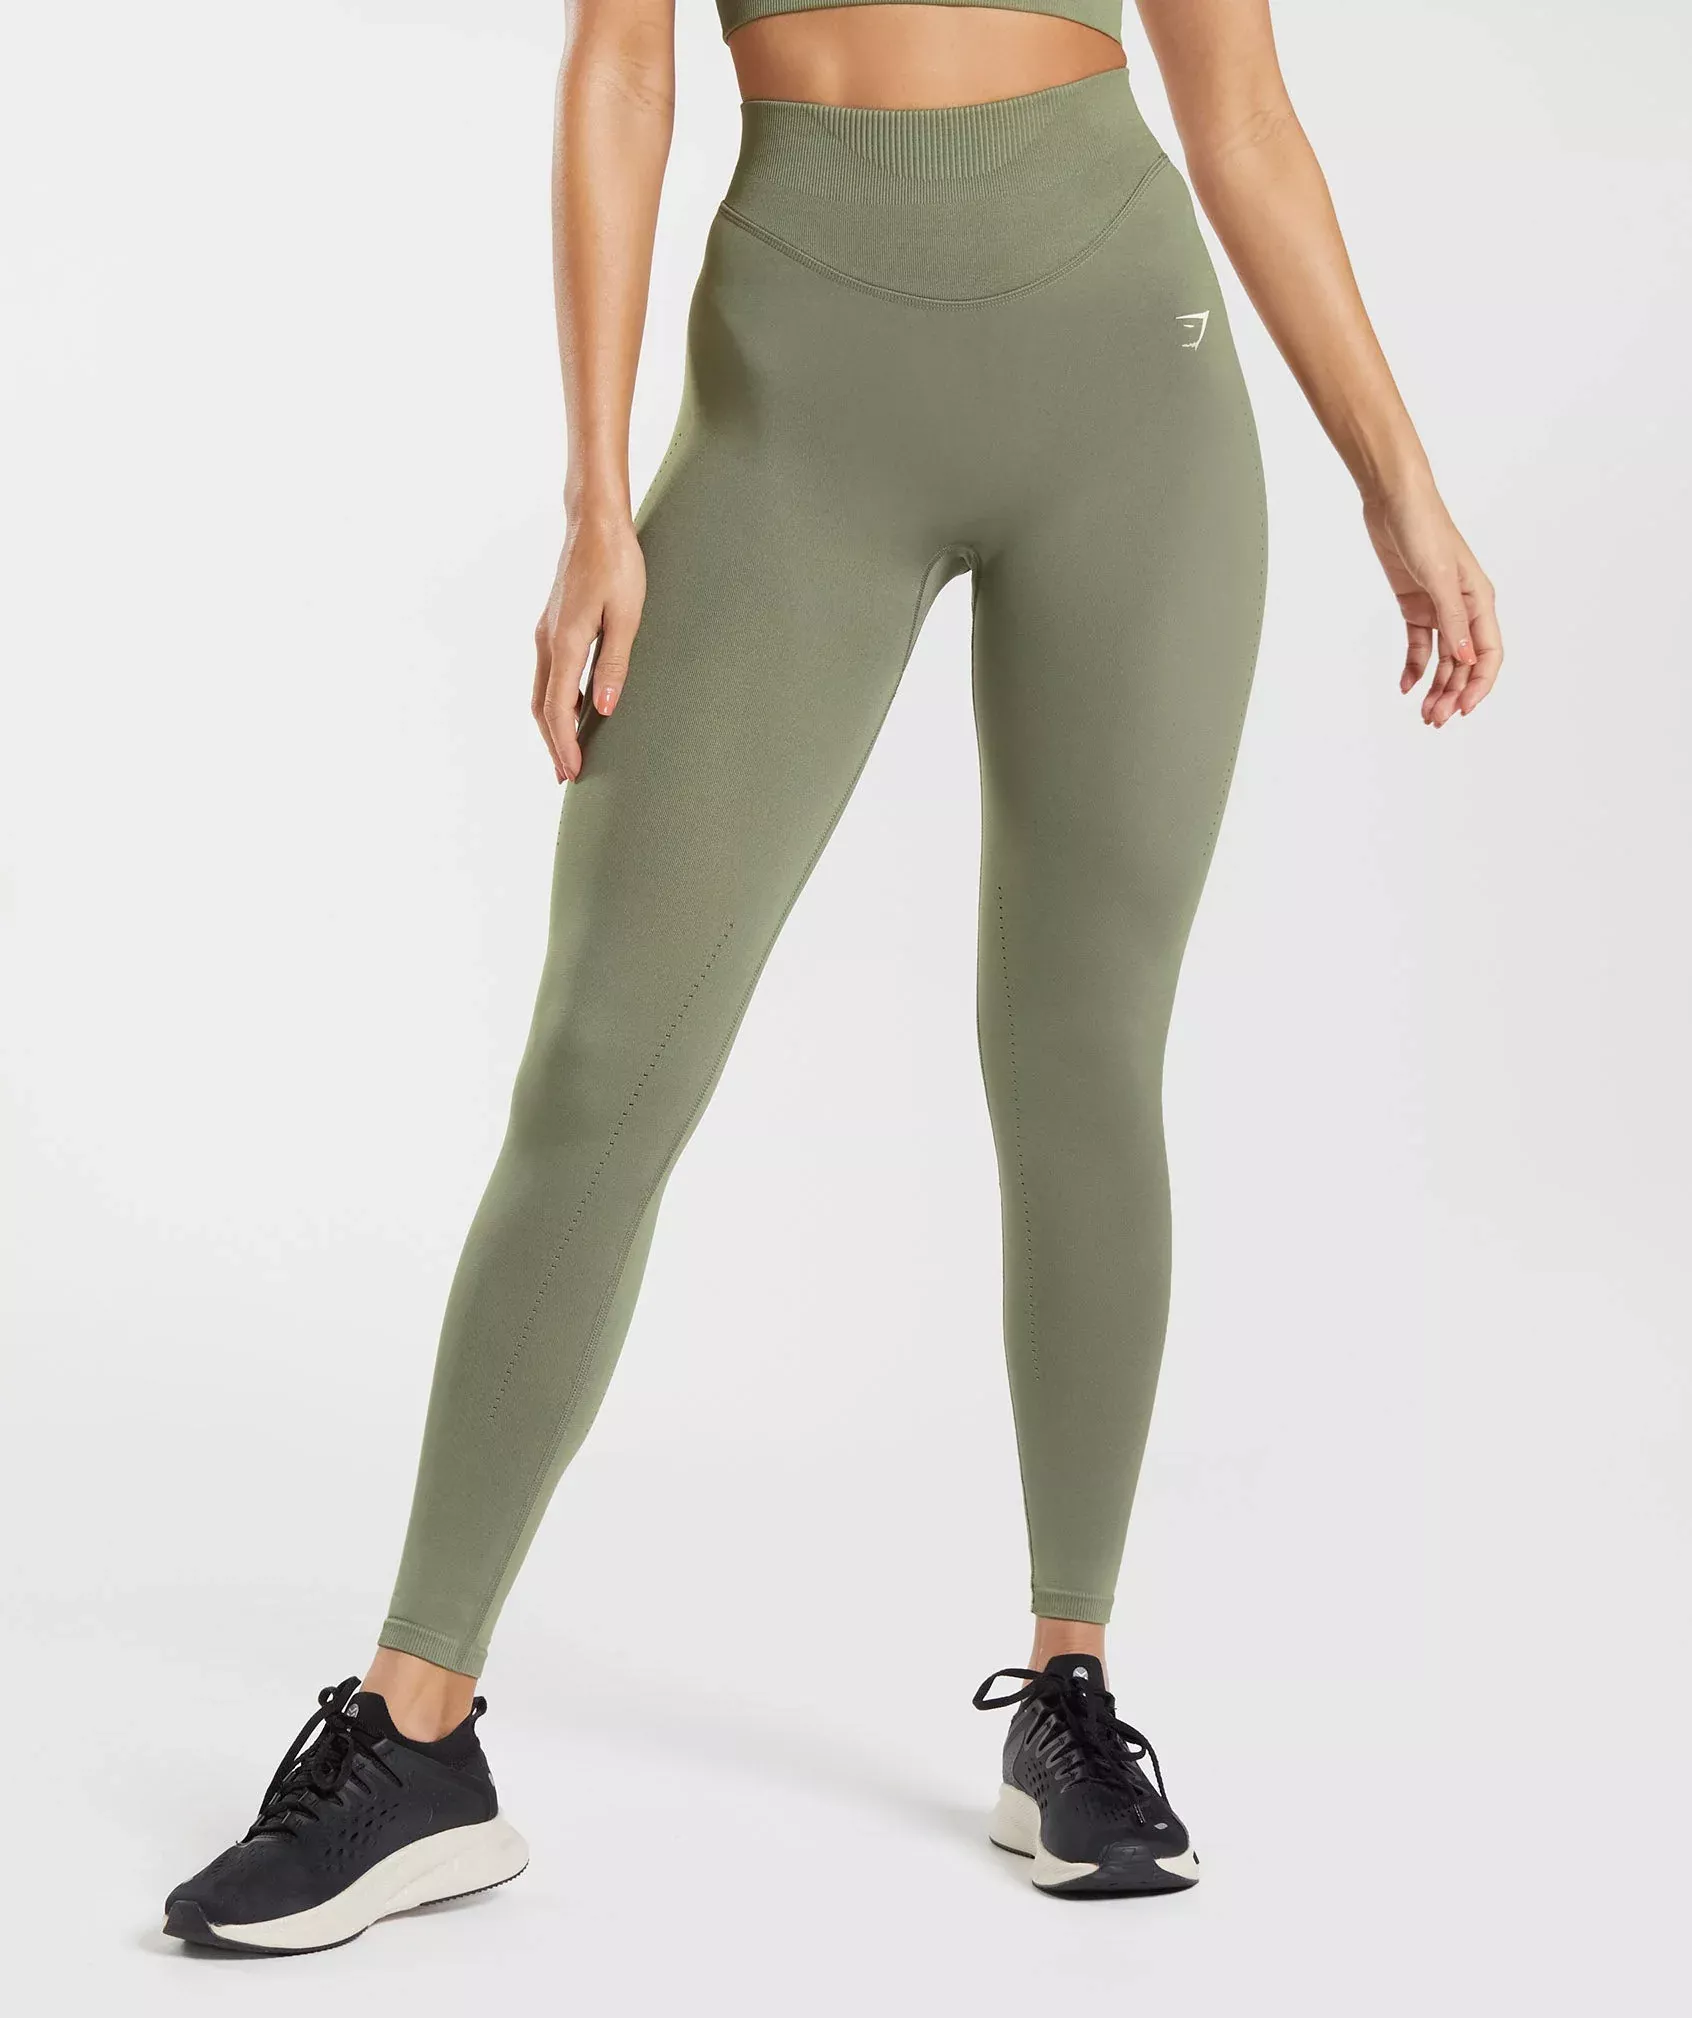 Buy SINOPHANT High Waisted Leggings with Pockets Women, Buttery